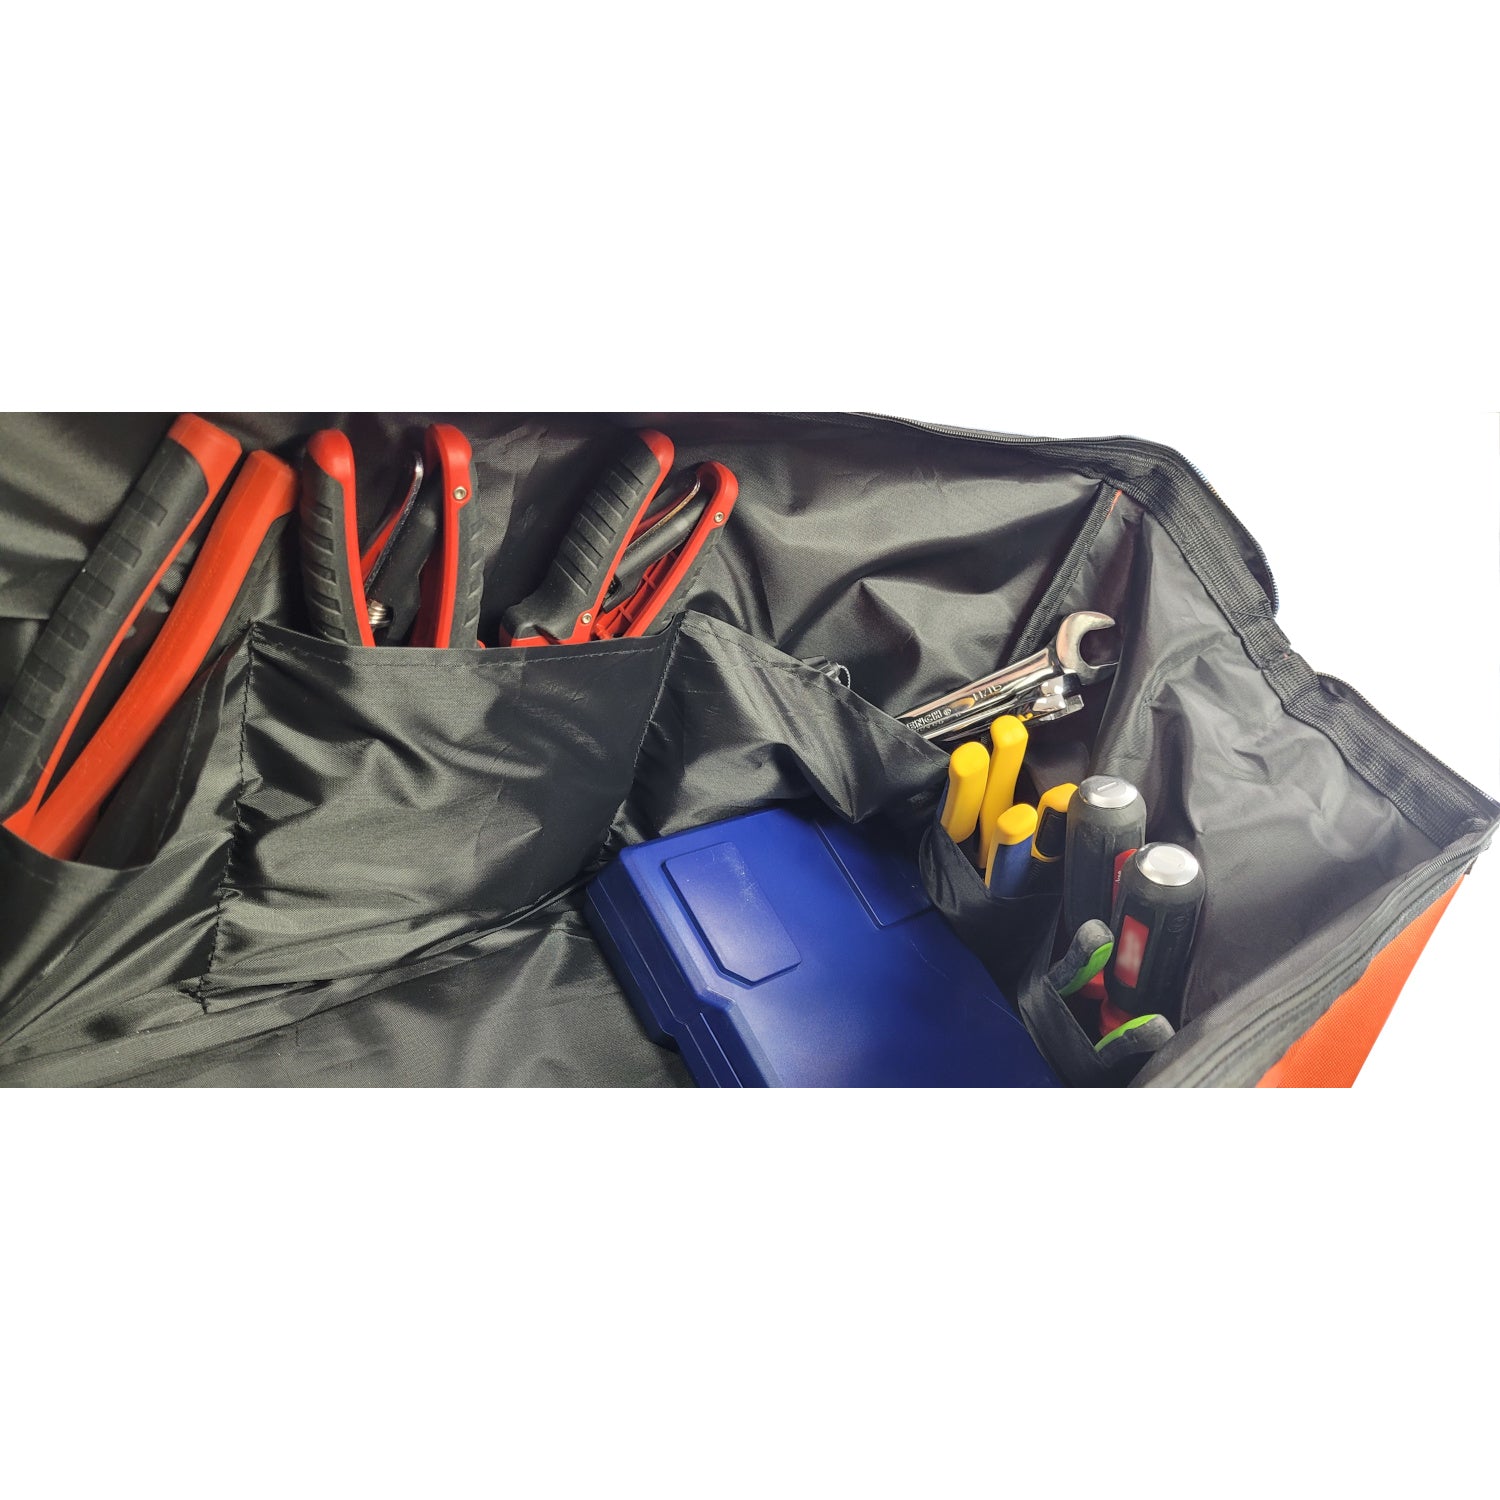 Interior pockets of the Max Promo Tool Bag. Shown with various tools that are not included.